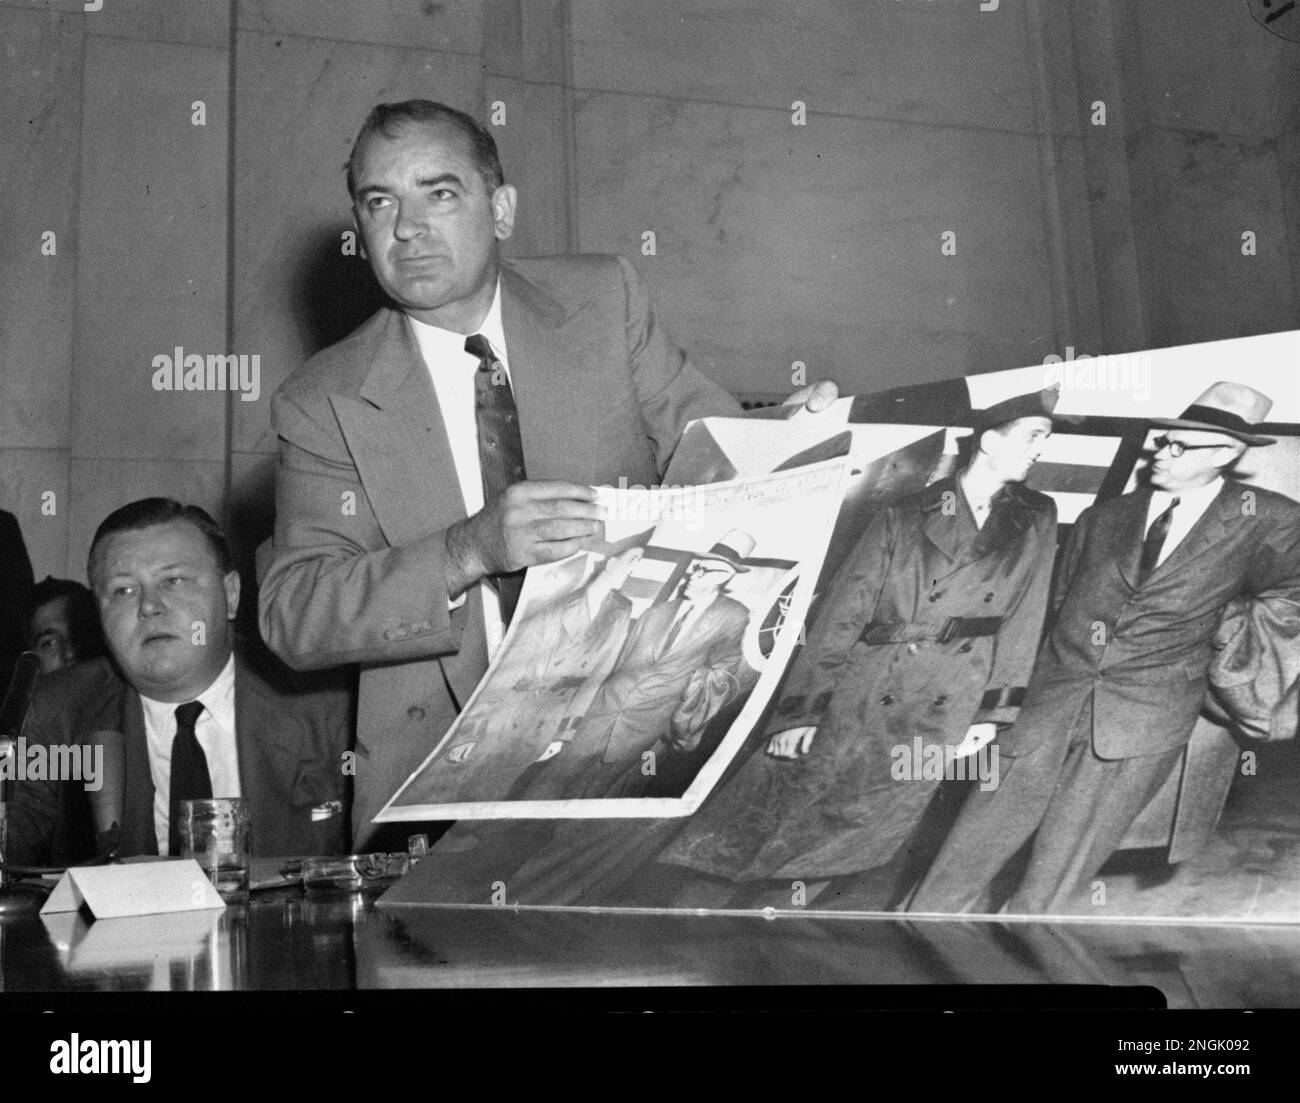 https://c8.alamy.com/comp/2NGK092/senator-joseph-mccarthy-key-figure-in-the-army-dispute-hearings-in-washington-discusses-a-controversial-photograph-of-army-secretary-stevens-and-pvt-g-david-schine-on-april-27-1954-the-senator-was-answering-charges-that-the-photo-foreground-submitted-as-an-exhibit-at-the-hearings-had-been-altered-ap-photowilliam-j-smith-2NGK092.jpg